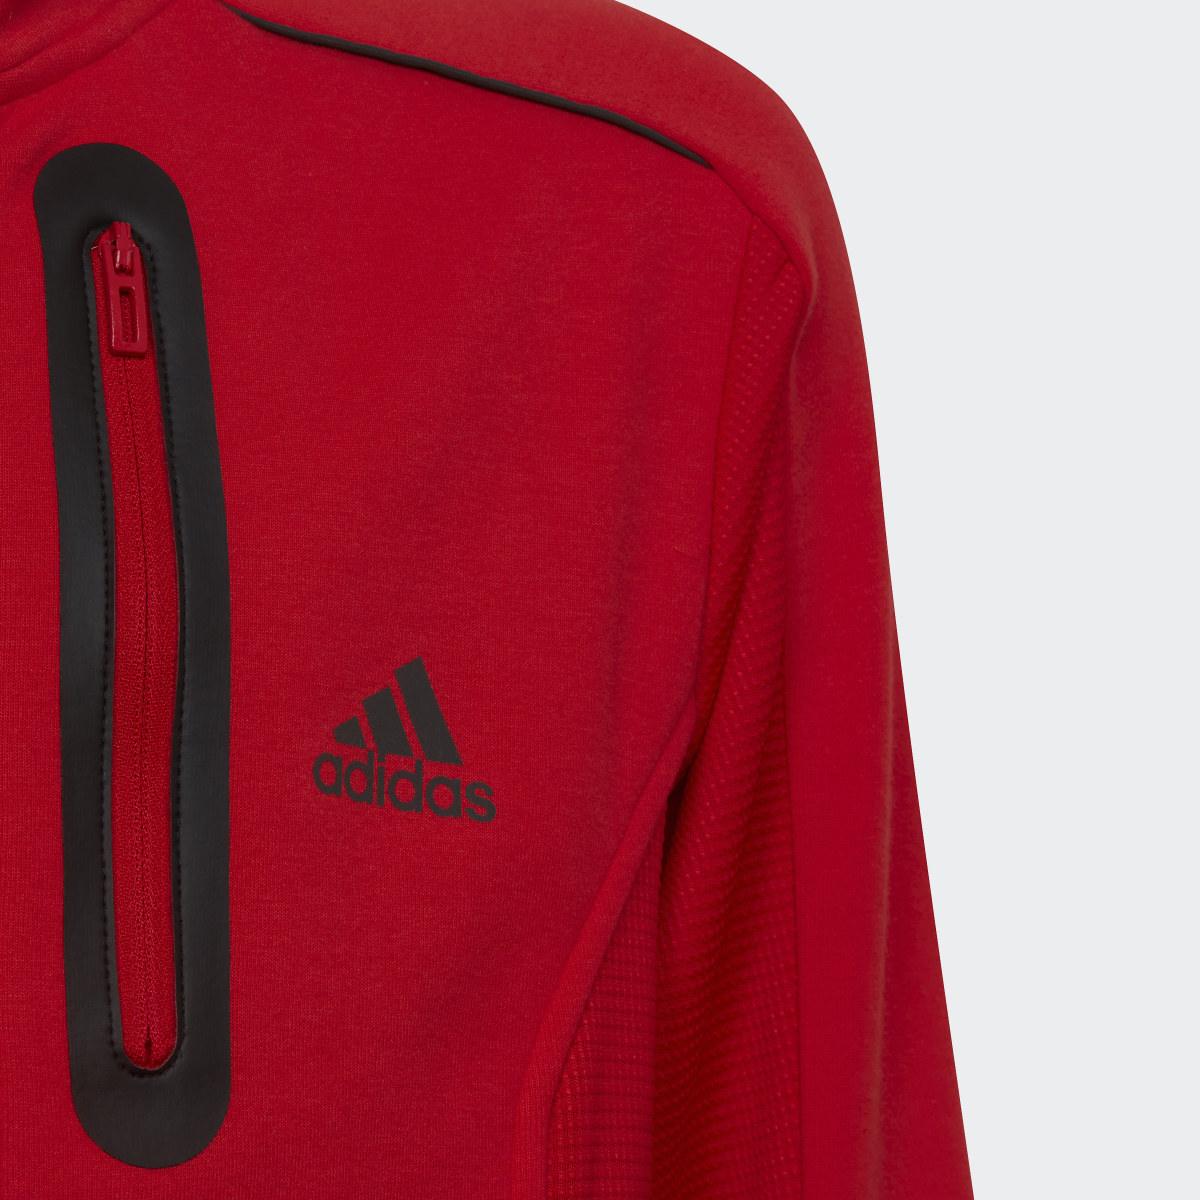 Adidas XFG Techy Inspired Cover-Up. 4